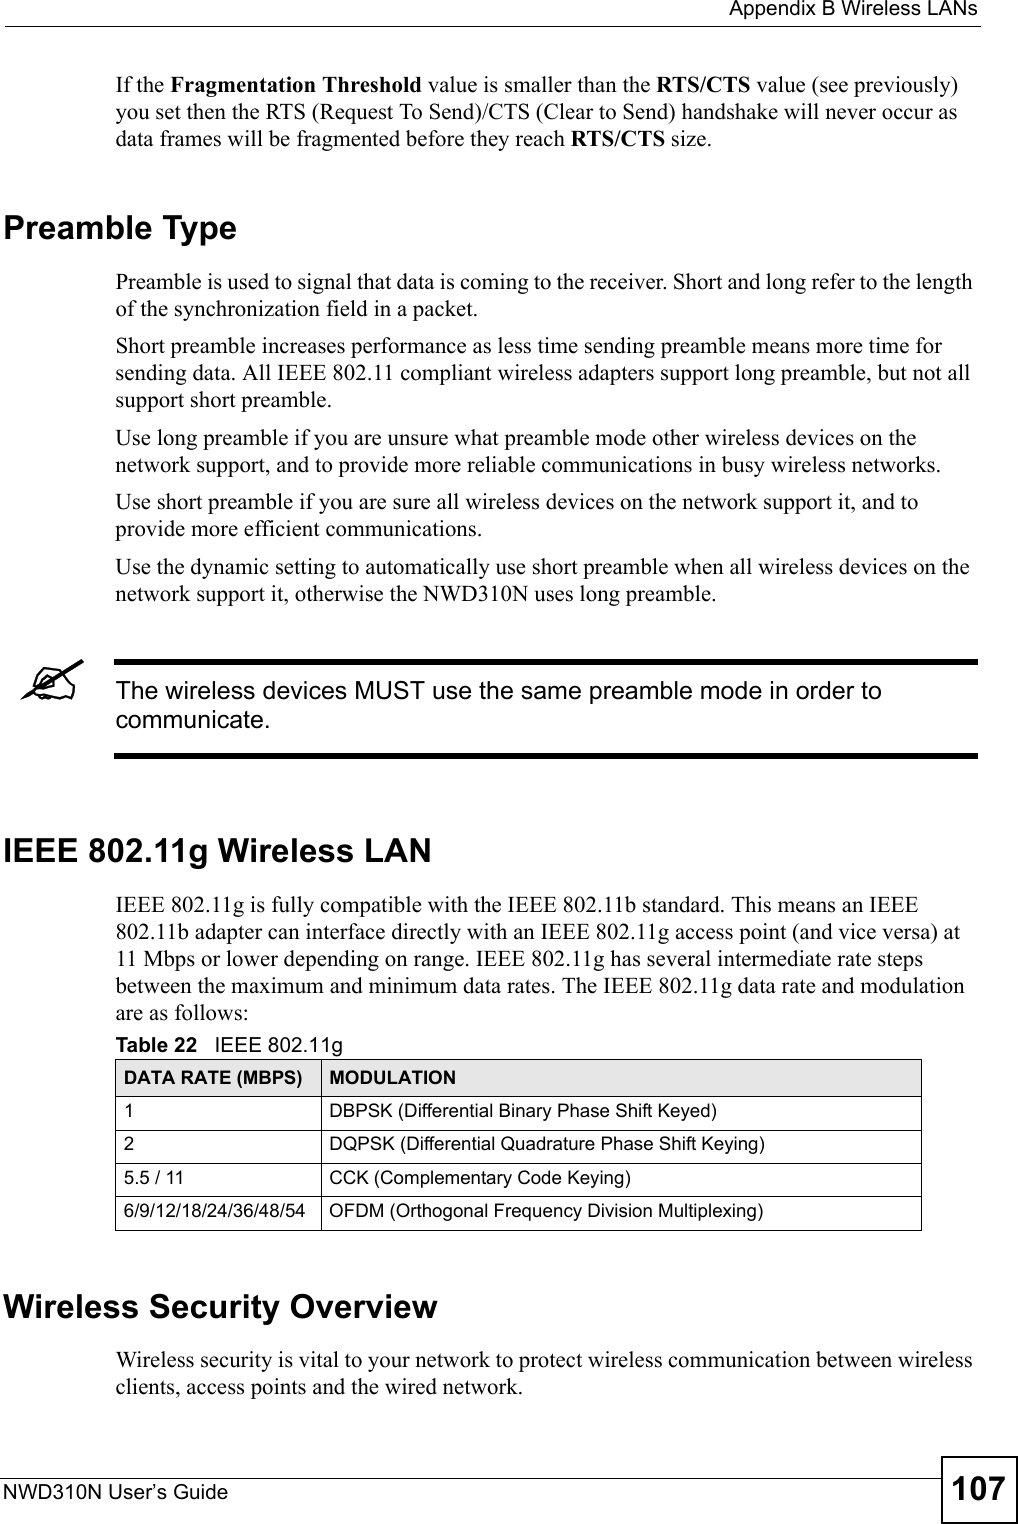  Appendix B Wireless LANsNWD310N User’s Guide 107If the Fragmentation Threshold value is smaller than the RTS/CTS value (see previously) you set then the RTS (Request To Send)/CTS (Clear to Send) handshake will never occur as data frames will be fragmented before they reach RTS/CTS size.Preamble TypePreamble is used to signal that data is coming to the receiver. Short and long refer to the length of the synchronization field in a packet.Short preamble increases performance as less time sending preamble means more time for sending data. All IEEE 802.11 compliant wireless adapters support long preamble, but not all support short preamble. Use long preamble if you are unsure what preamble mode other wireless devices on the network support, and to provide more reliable communications in busy wireless networks. Use short preamble if you are sure all wireless devices on the network support it, and to provide more efficient communications.Use the dynamic setting to automatically use short preamble when all wireless devices on the network support it, otherwise the NWD310N uses long preamble.&quot;The wireless devices MUST use the same preamble mode in order to communicate.IEEE 802.11g Wireless LANIEEE 802.11g is fully compatible with the IEEE 802.11b standard. This means an IEEE 802.11b adapter can interface directly with an IEEE 802.11g access point (and vice versa) at 11 Mbps or lower depending on range. IEEE 802.11g has several intermediate rate steps between the maximum and minimum data rates. The IEEE 802.11g data rate and modulation are as follows:Wireless Security OverviewWireless security is vital to your network to protect wireless communication between wireless clients, access points and the wired network.Table 22   IEEE 802.11gDATA RATE (MBPS) MODULATION1 DBPSK (Differential Binary Phase Shift Keyed)2 DQPSK (Differential Quadrature Phase Shift Keying)5.5 / 11 CCK (Complementary Code Keying) 6/9/12/18/24/36/48/54 OFDM (Orthogonal Frequency Division Multiplexing) 